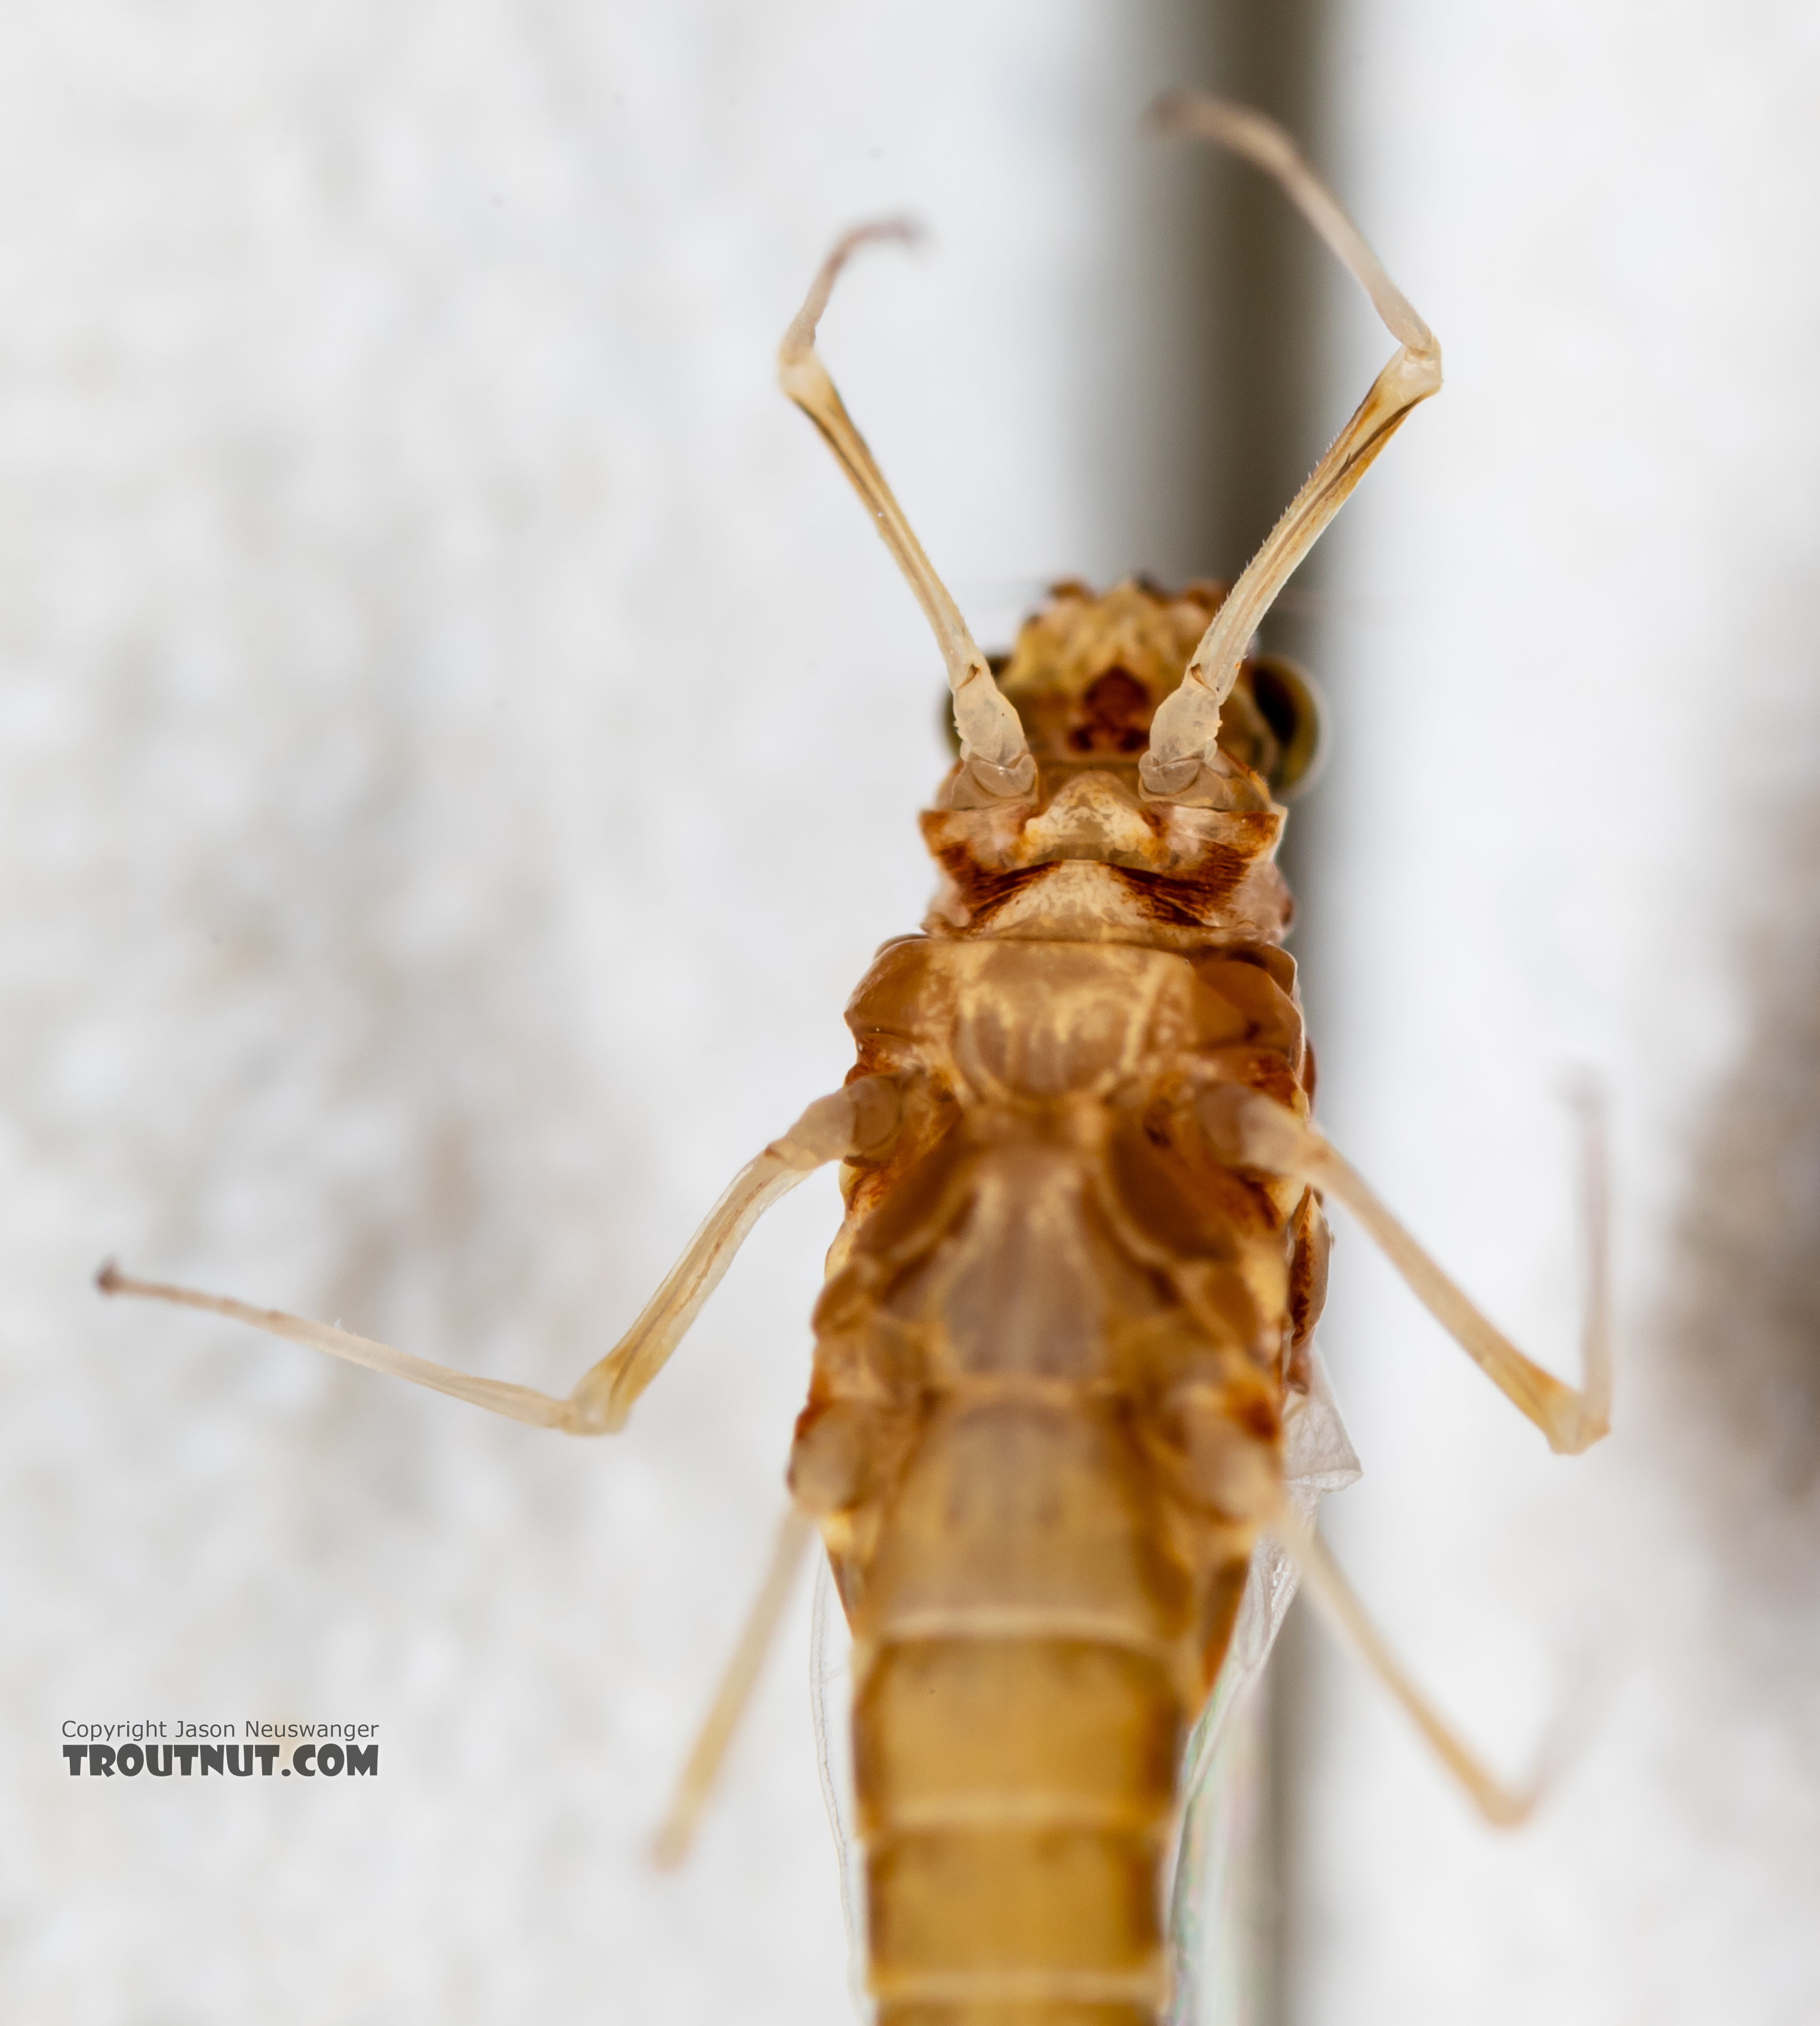 Female Ephemerella dorothea infrequens (Pale Morning Dun) Mayfly Spinner from the Madison River in Montana